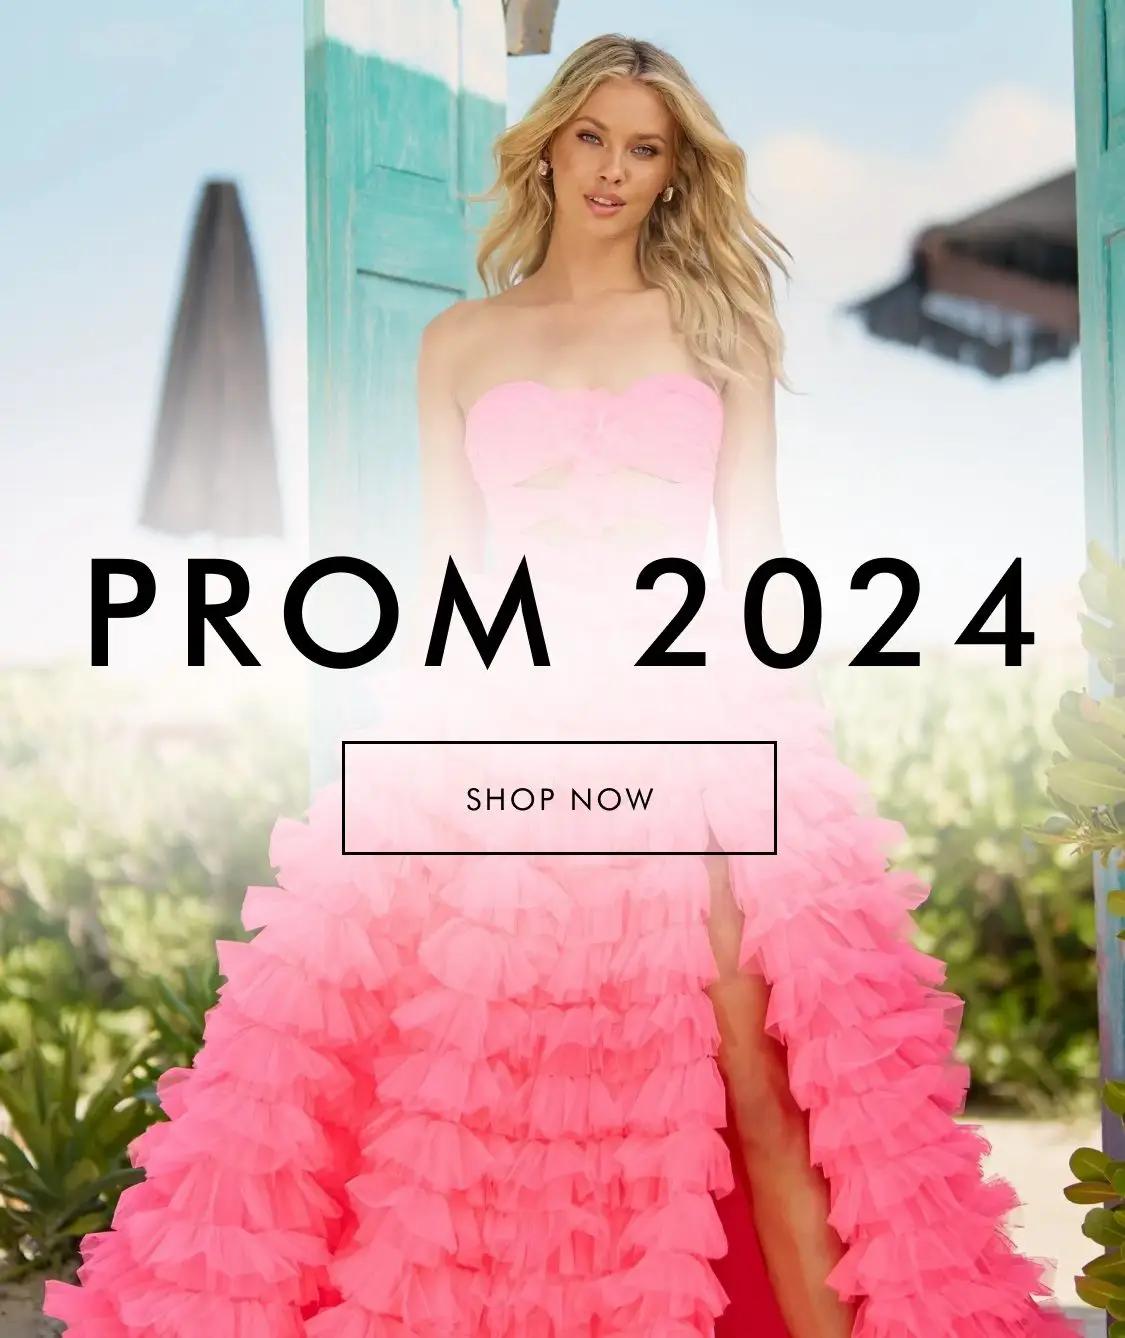 Prom 2024 mobile banner